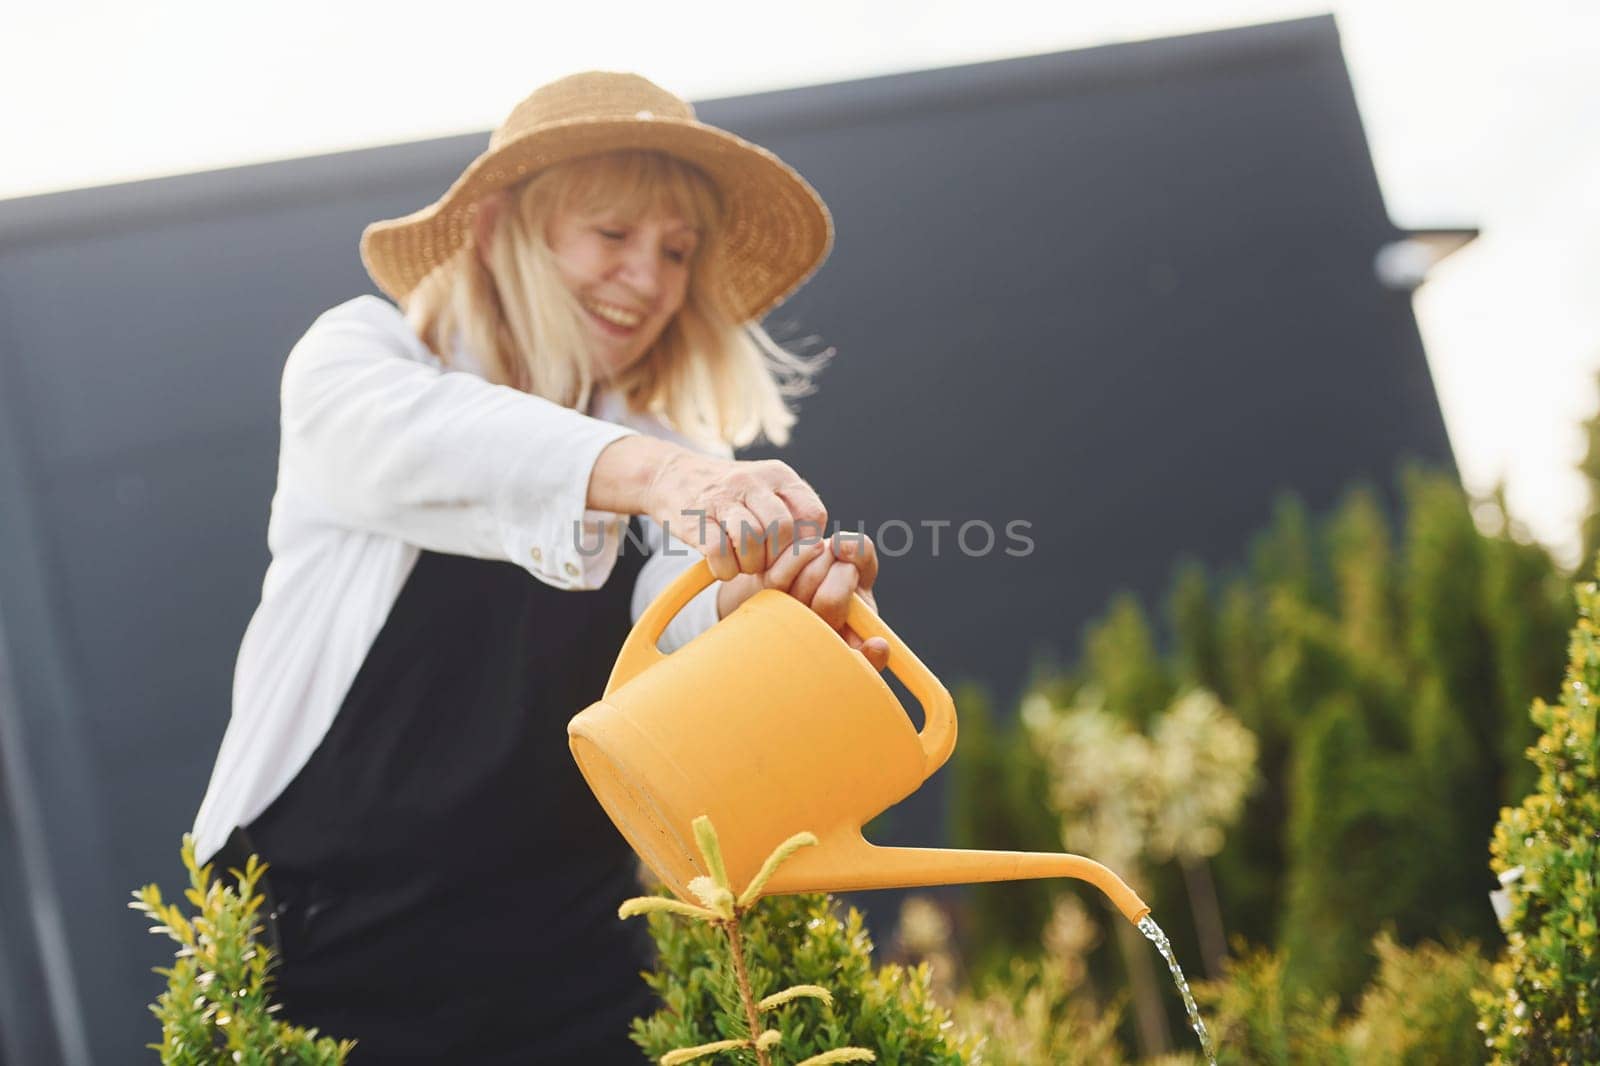 Using yellow colored watering can. Senior woman is in the garden at daytime. Conception of plants and seasons by Standret